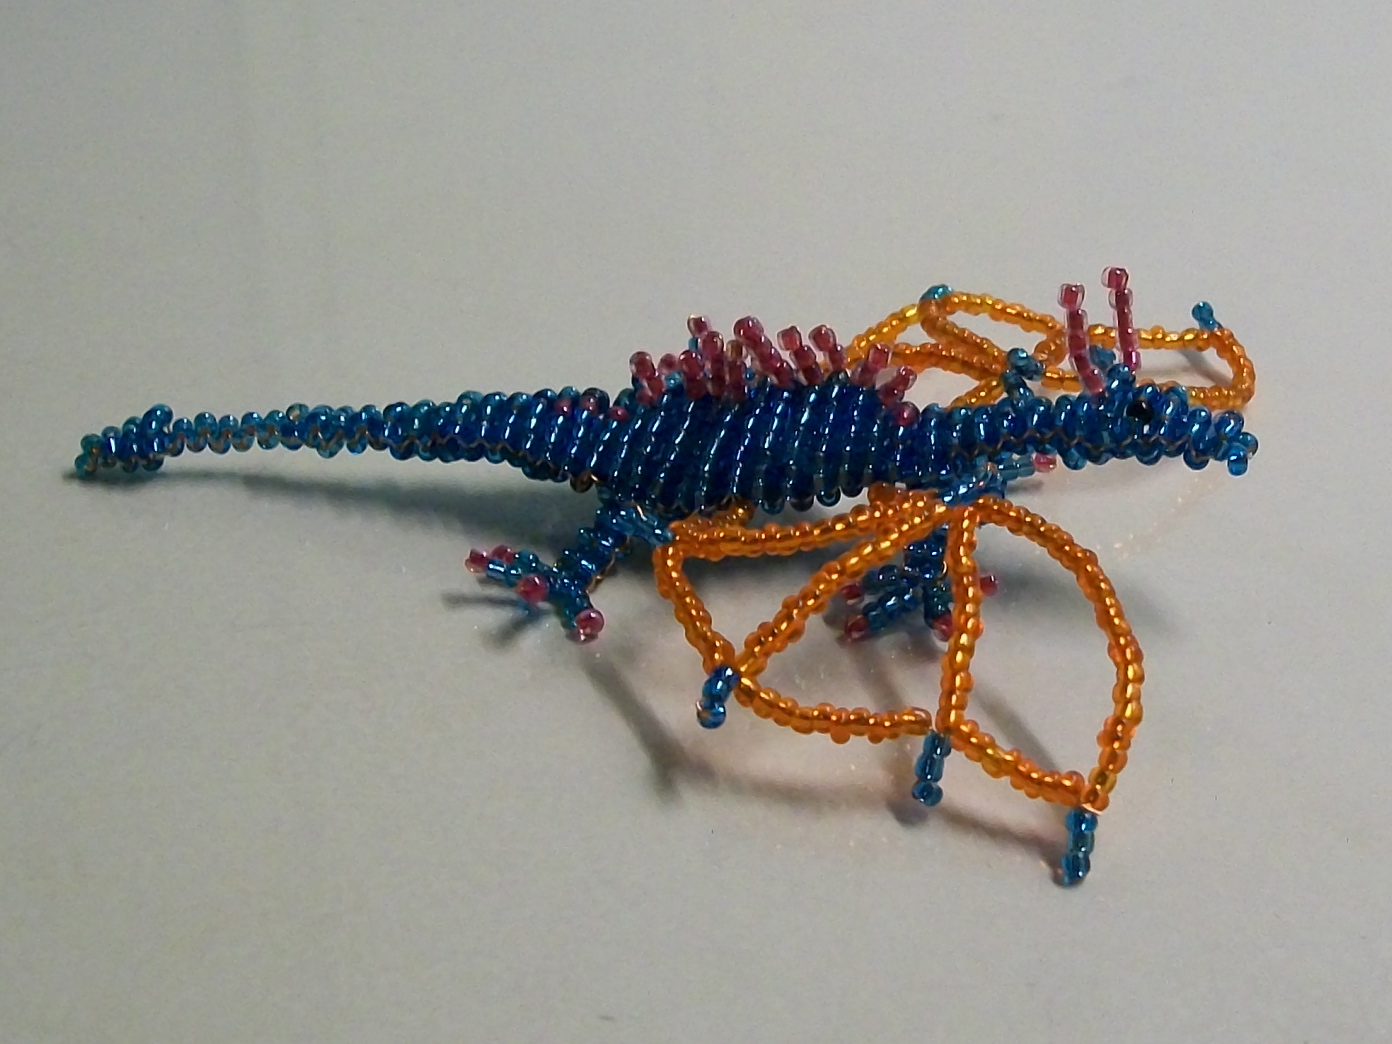 Beading for the very beginners Dragon